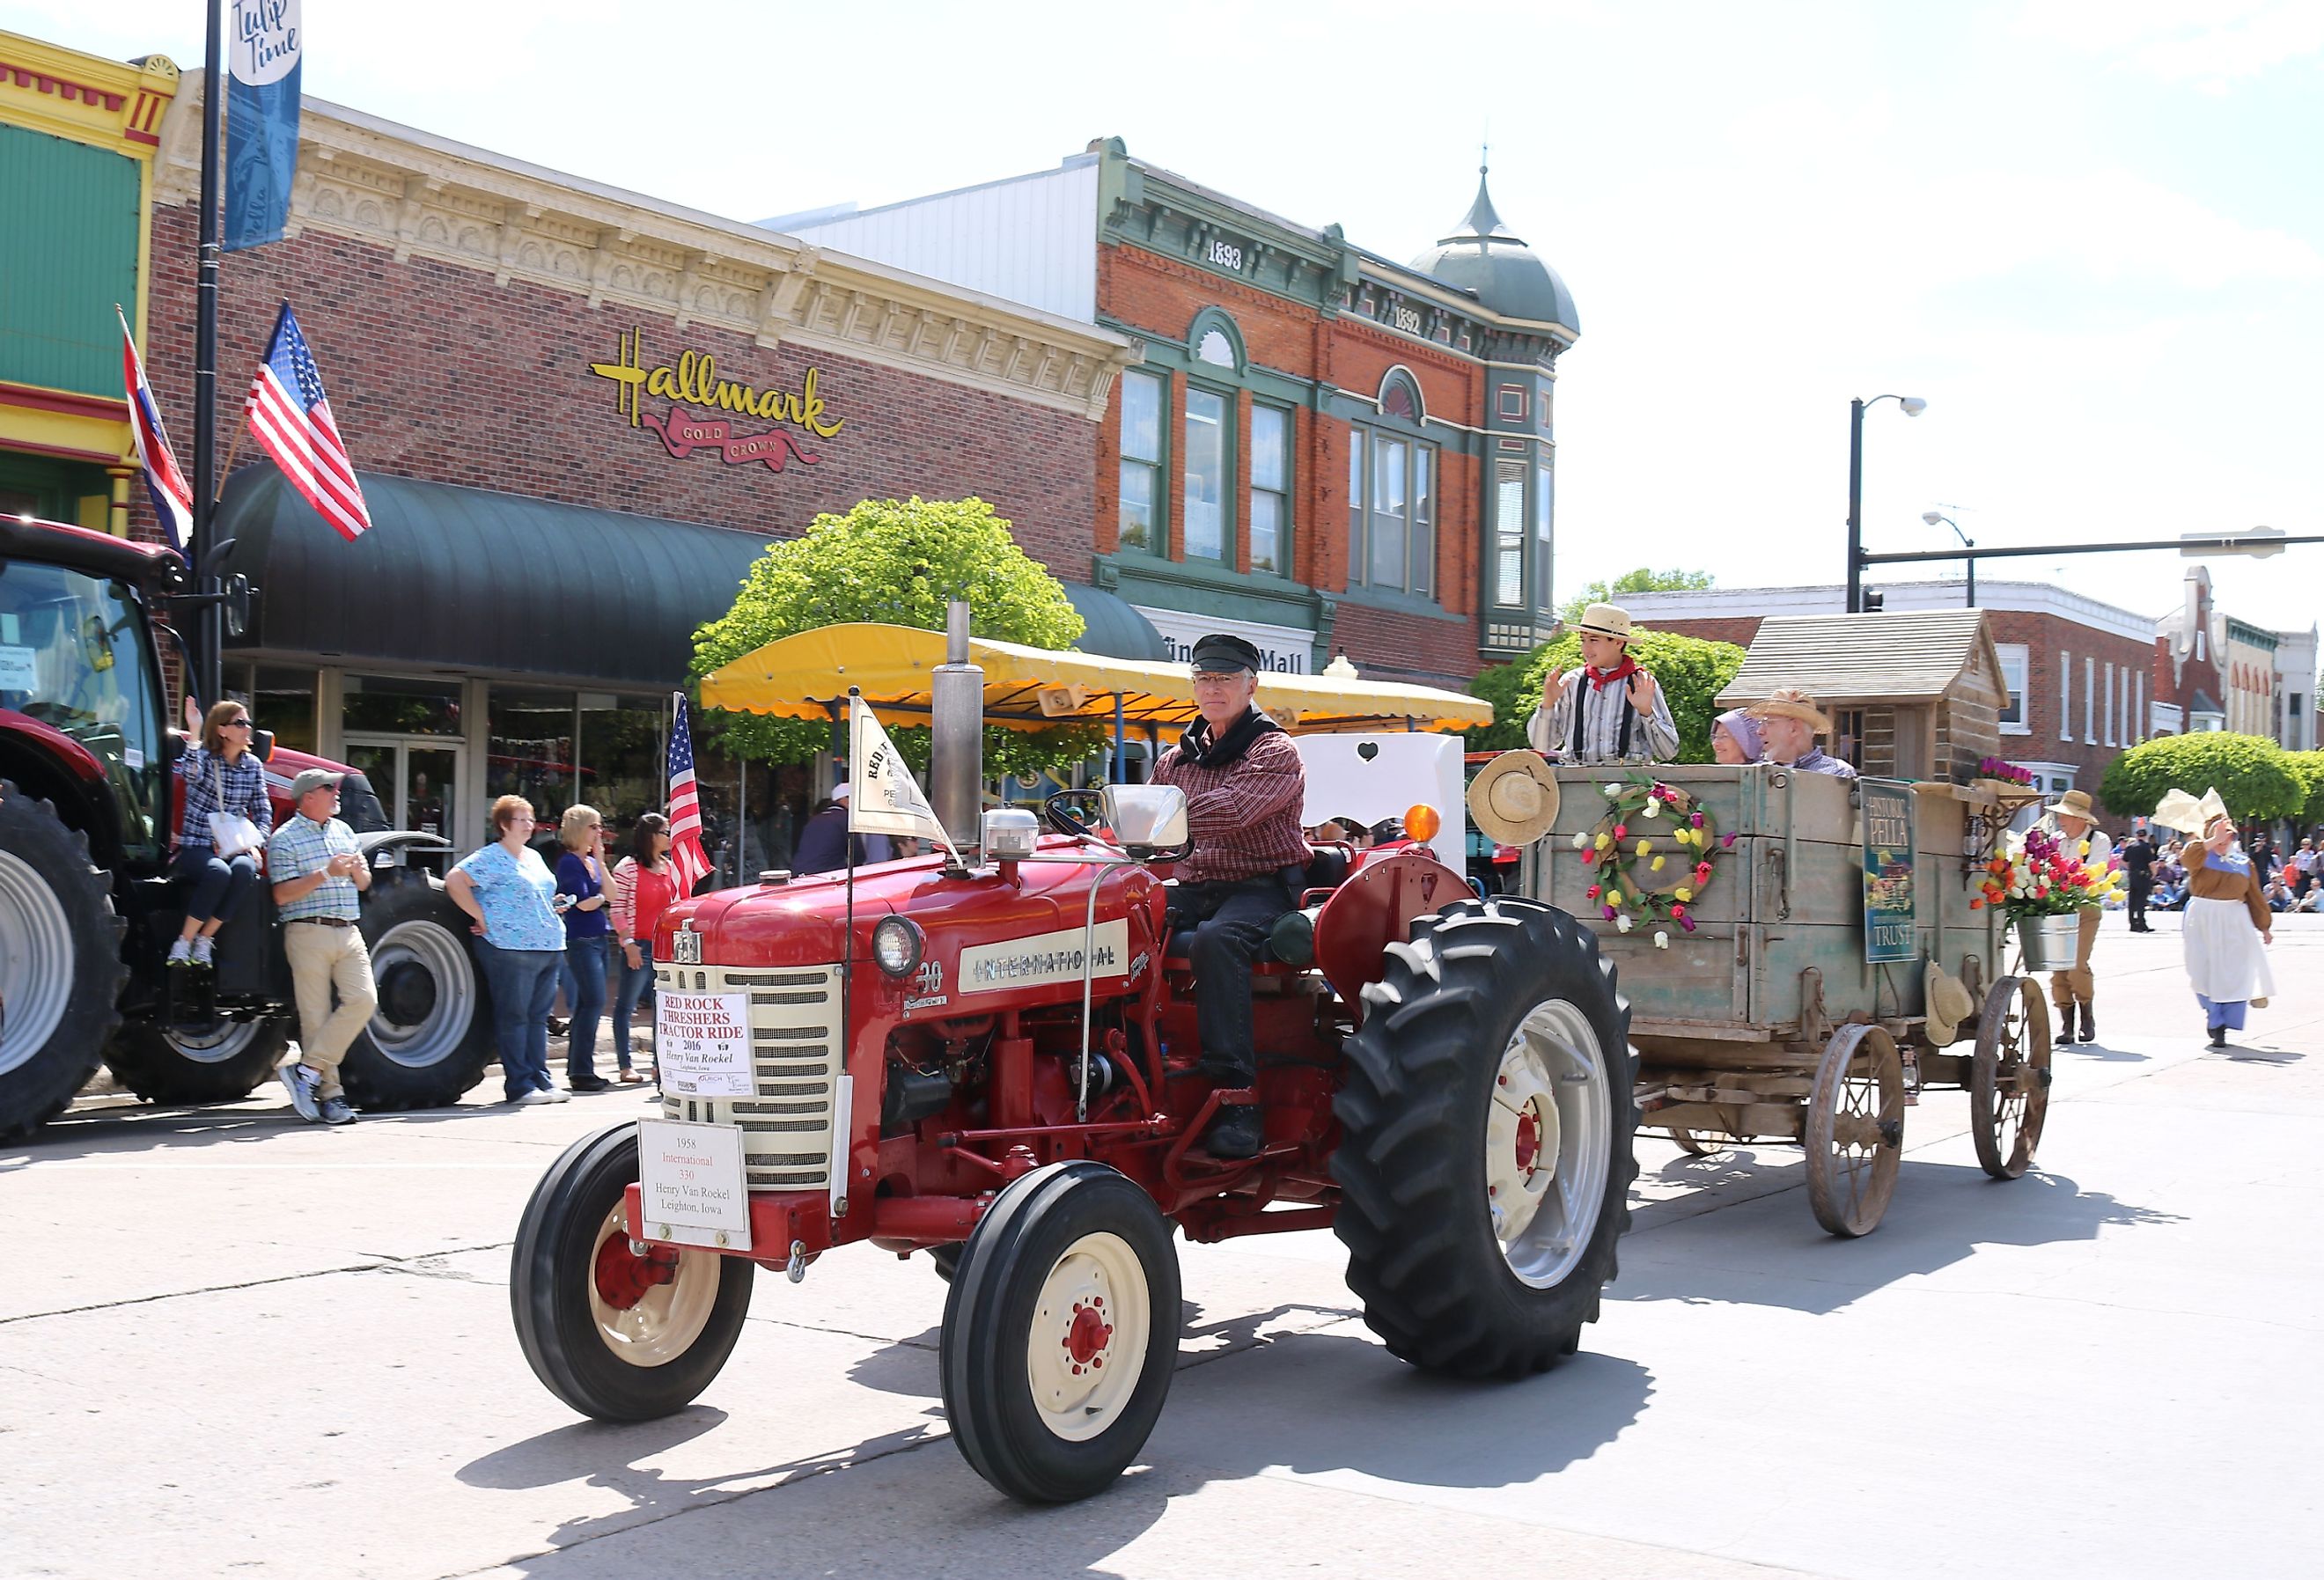 Tulip Time Festival along with tractor rides are some of the attractions in Pella, Iowa. Image credit Rexjaymes via Shutterstock